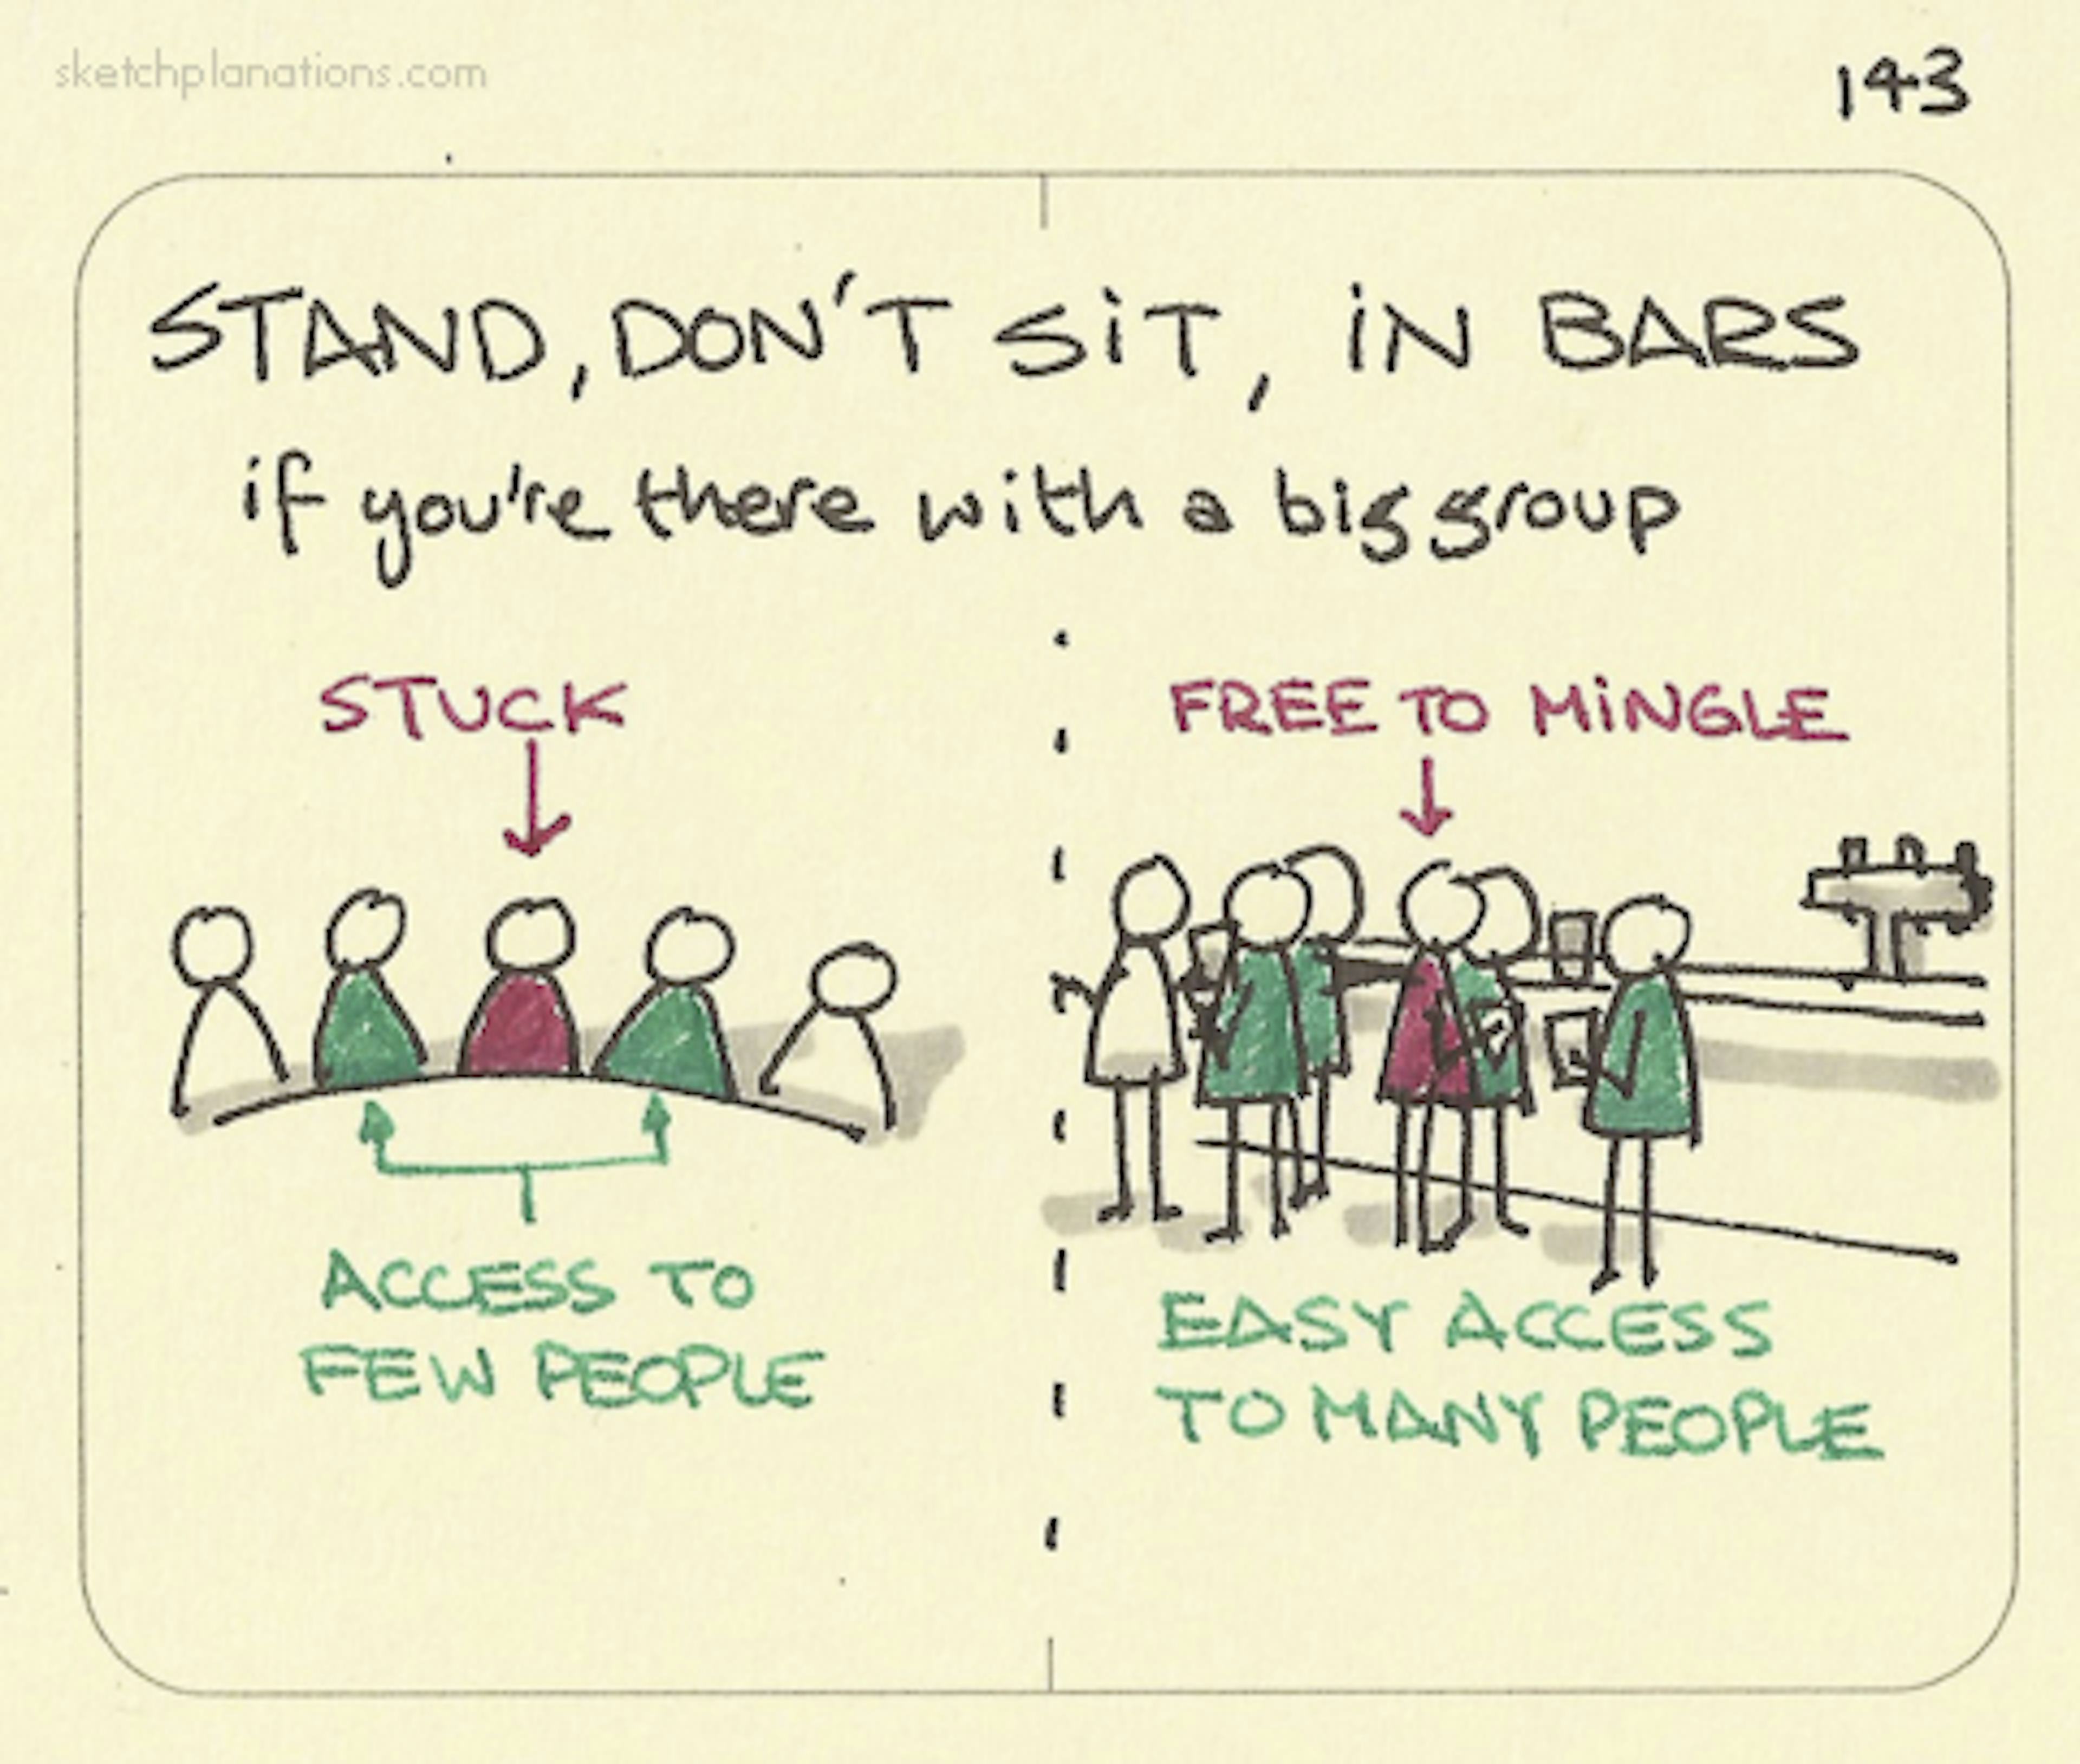 Stand, don’t sit, in bars, if you’re there with a big group - Sketchplanations